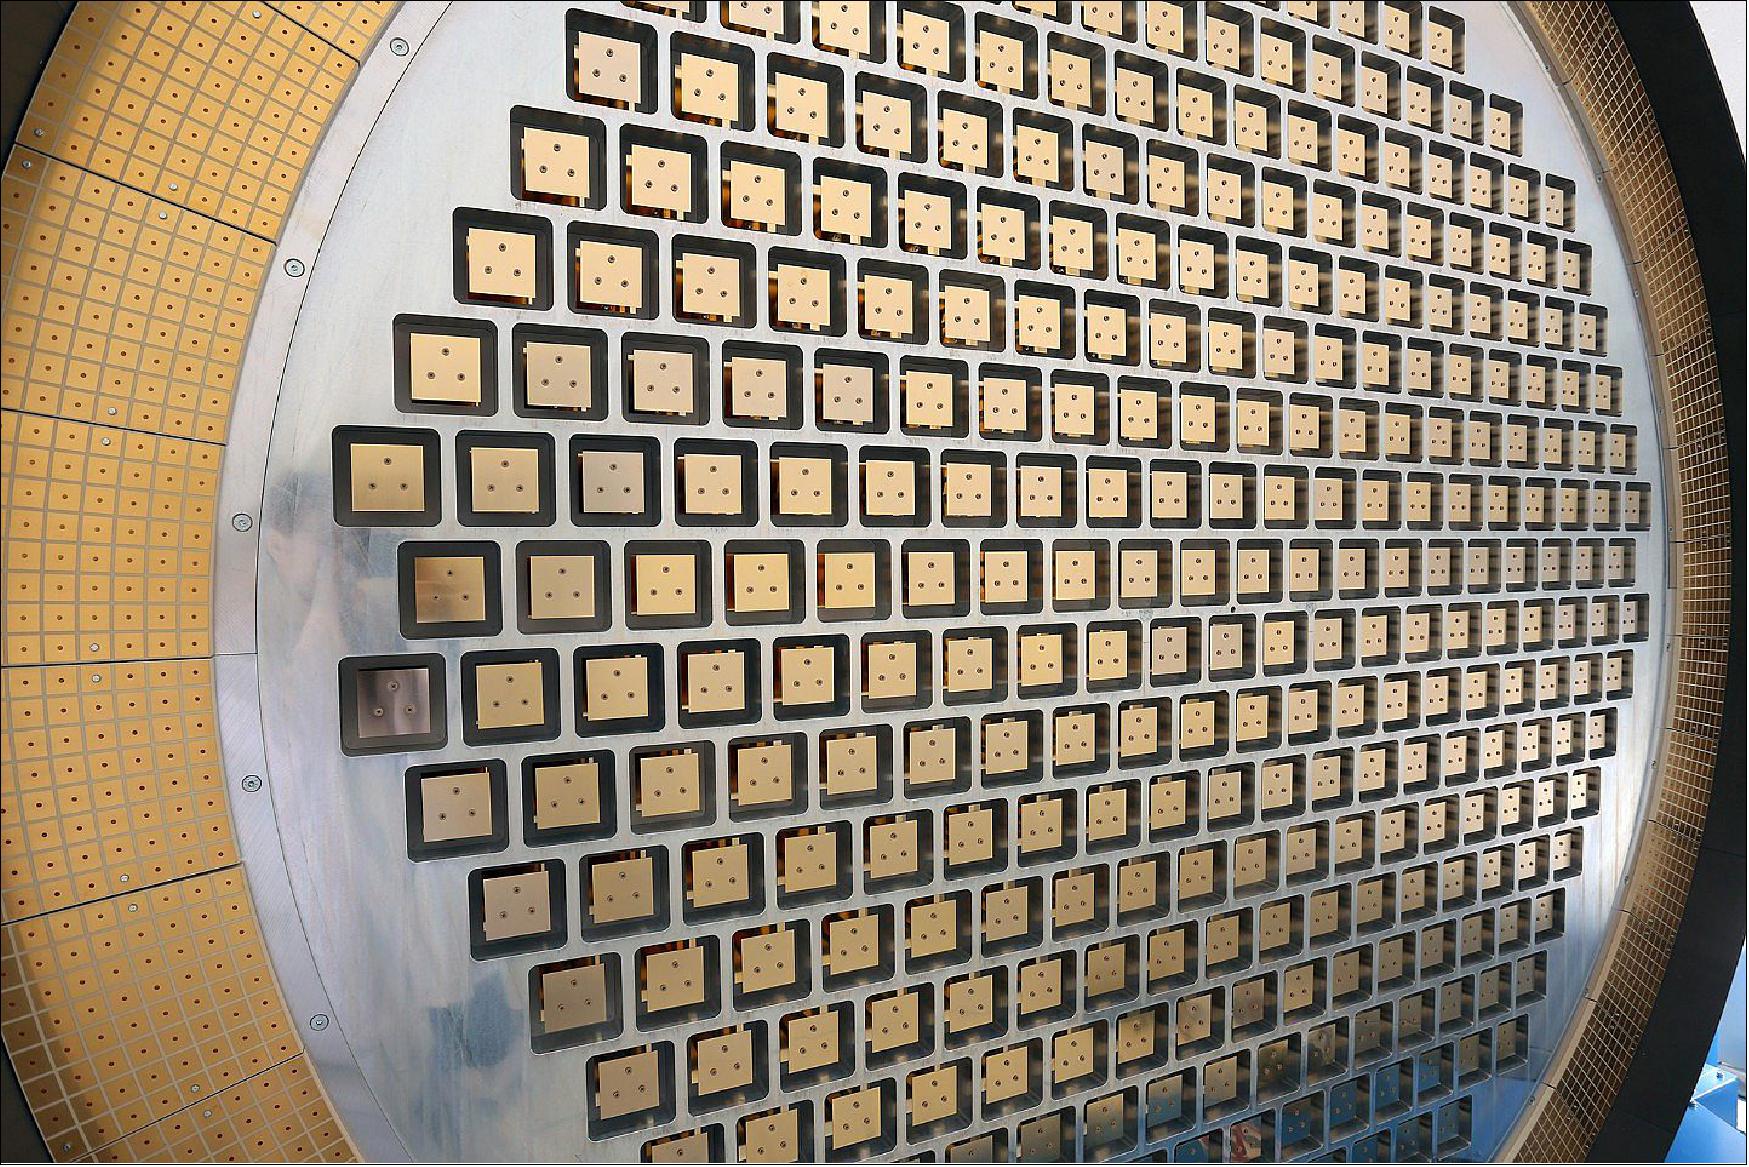 Figure 1: Phased array antenna of the GESTRA transmitter and receiver (image credit: Farunhofer FHR / Philipp Wolter)